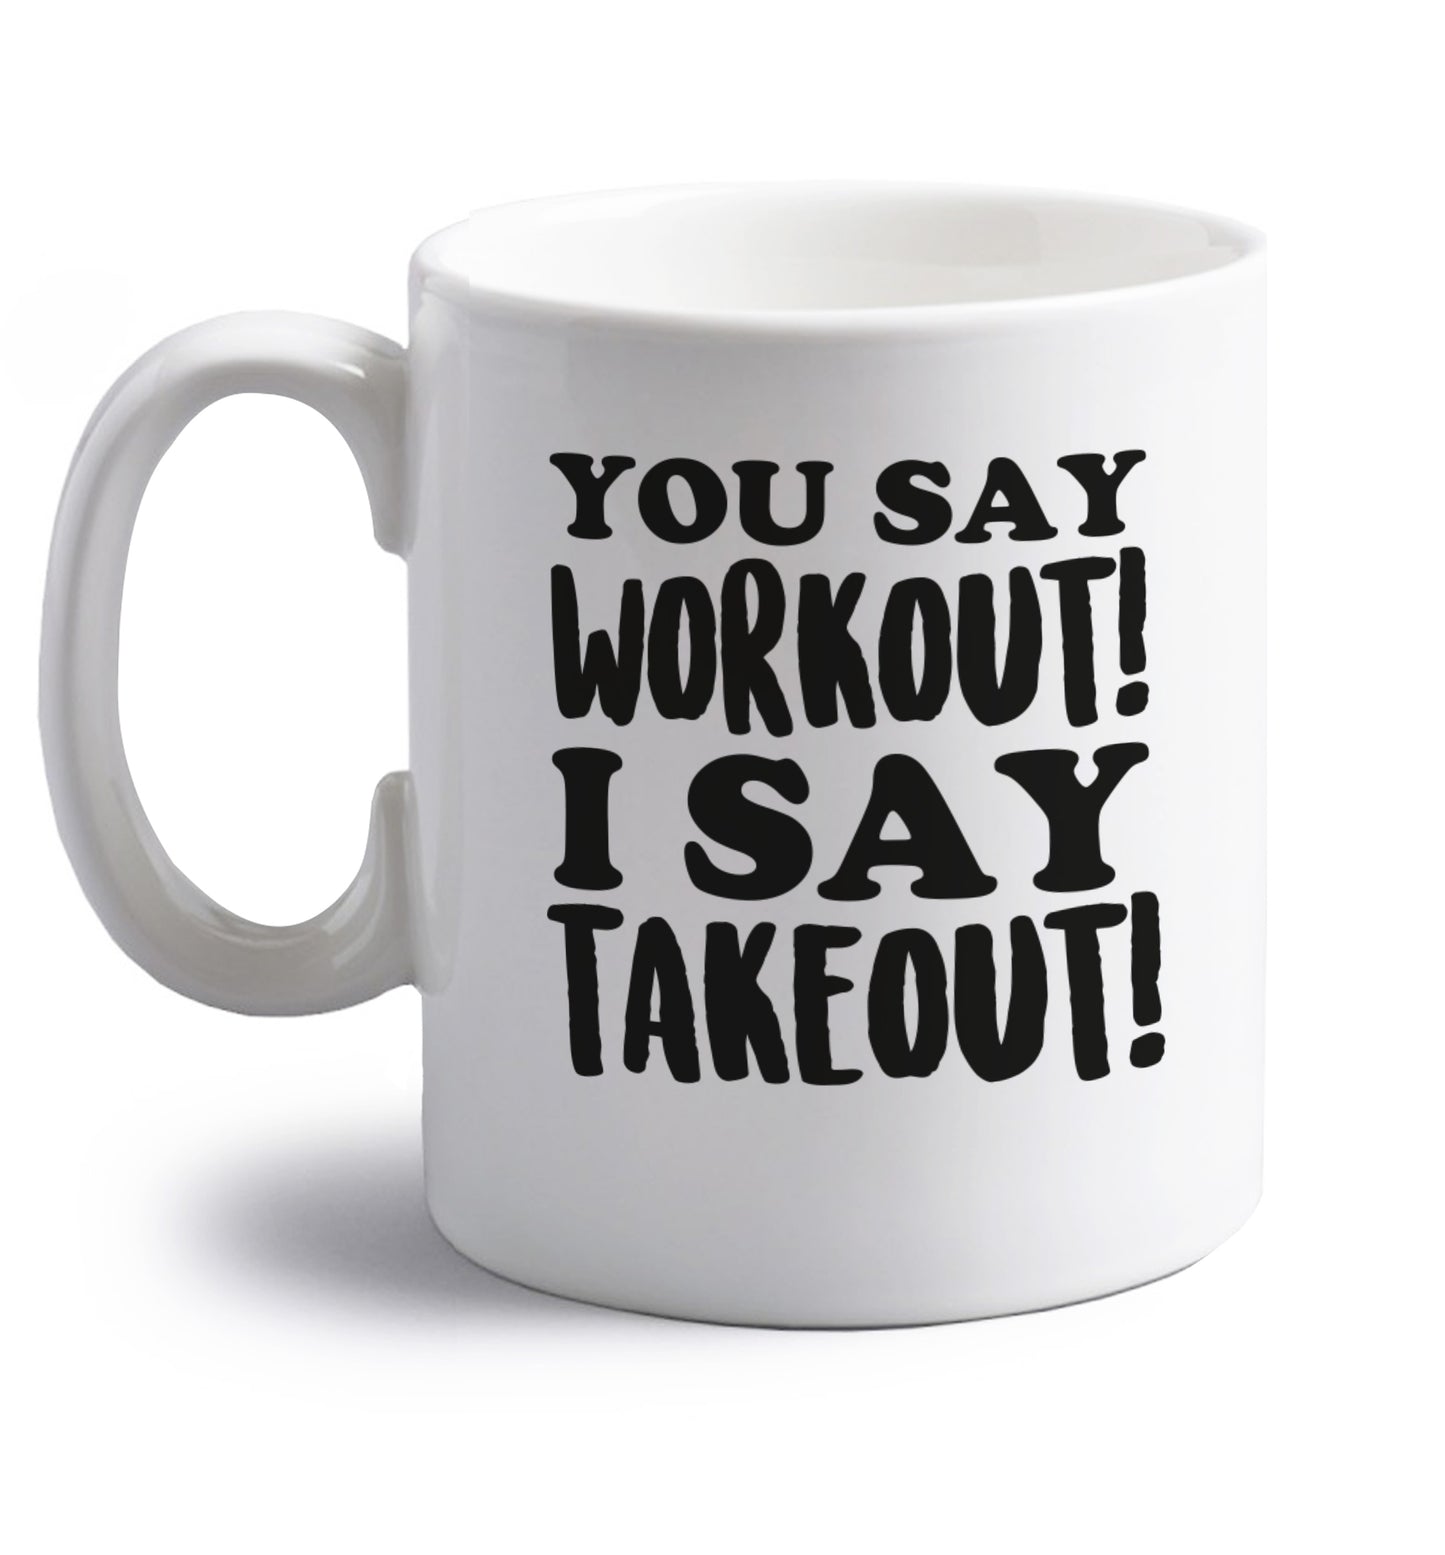 You say workout I say takeout! right handed white ceramic mug 